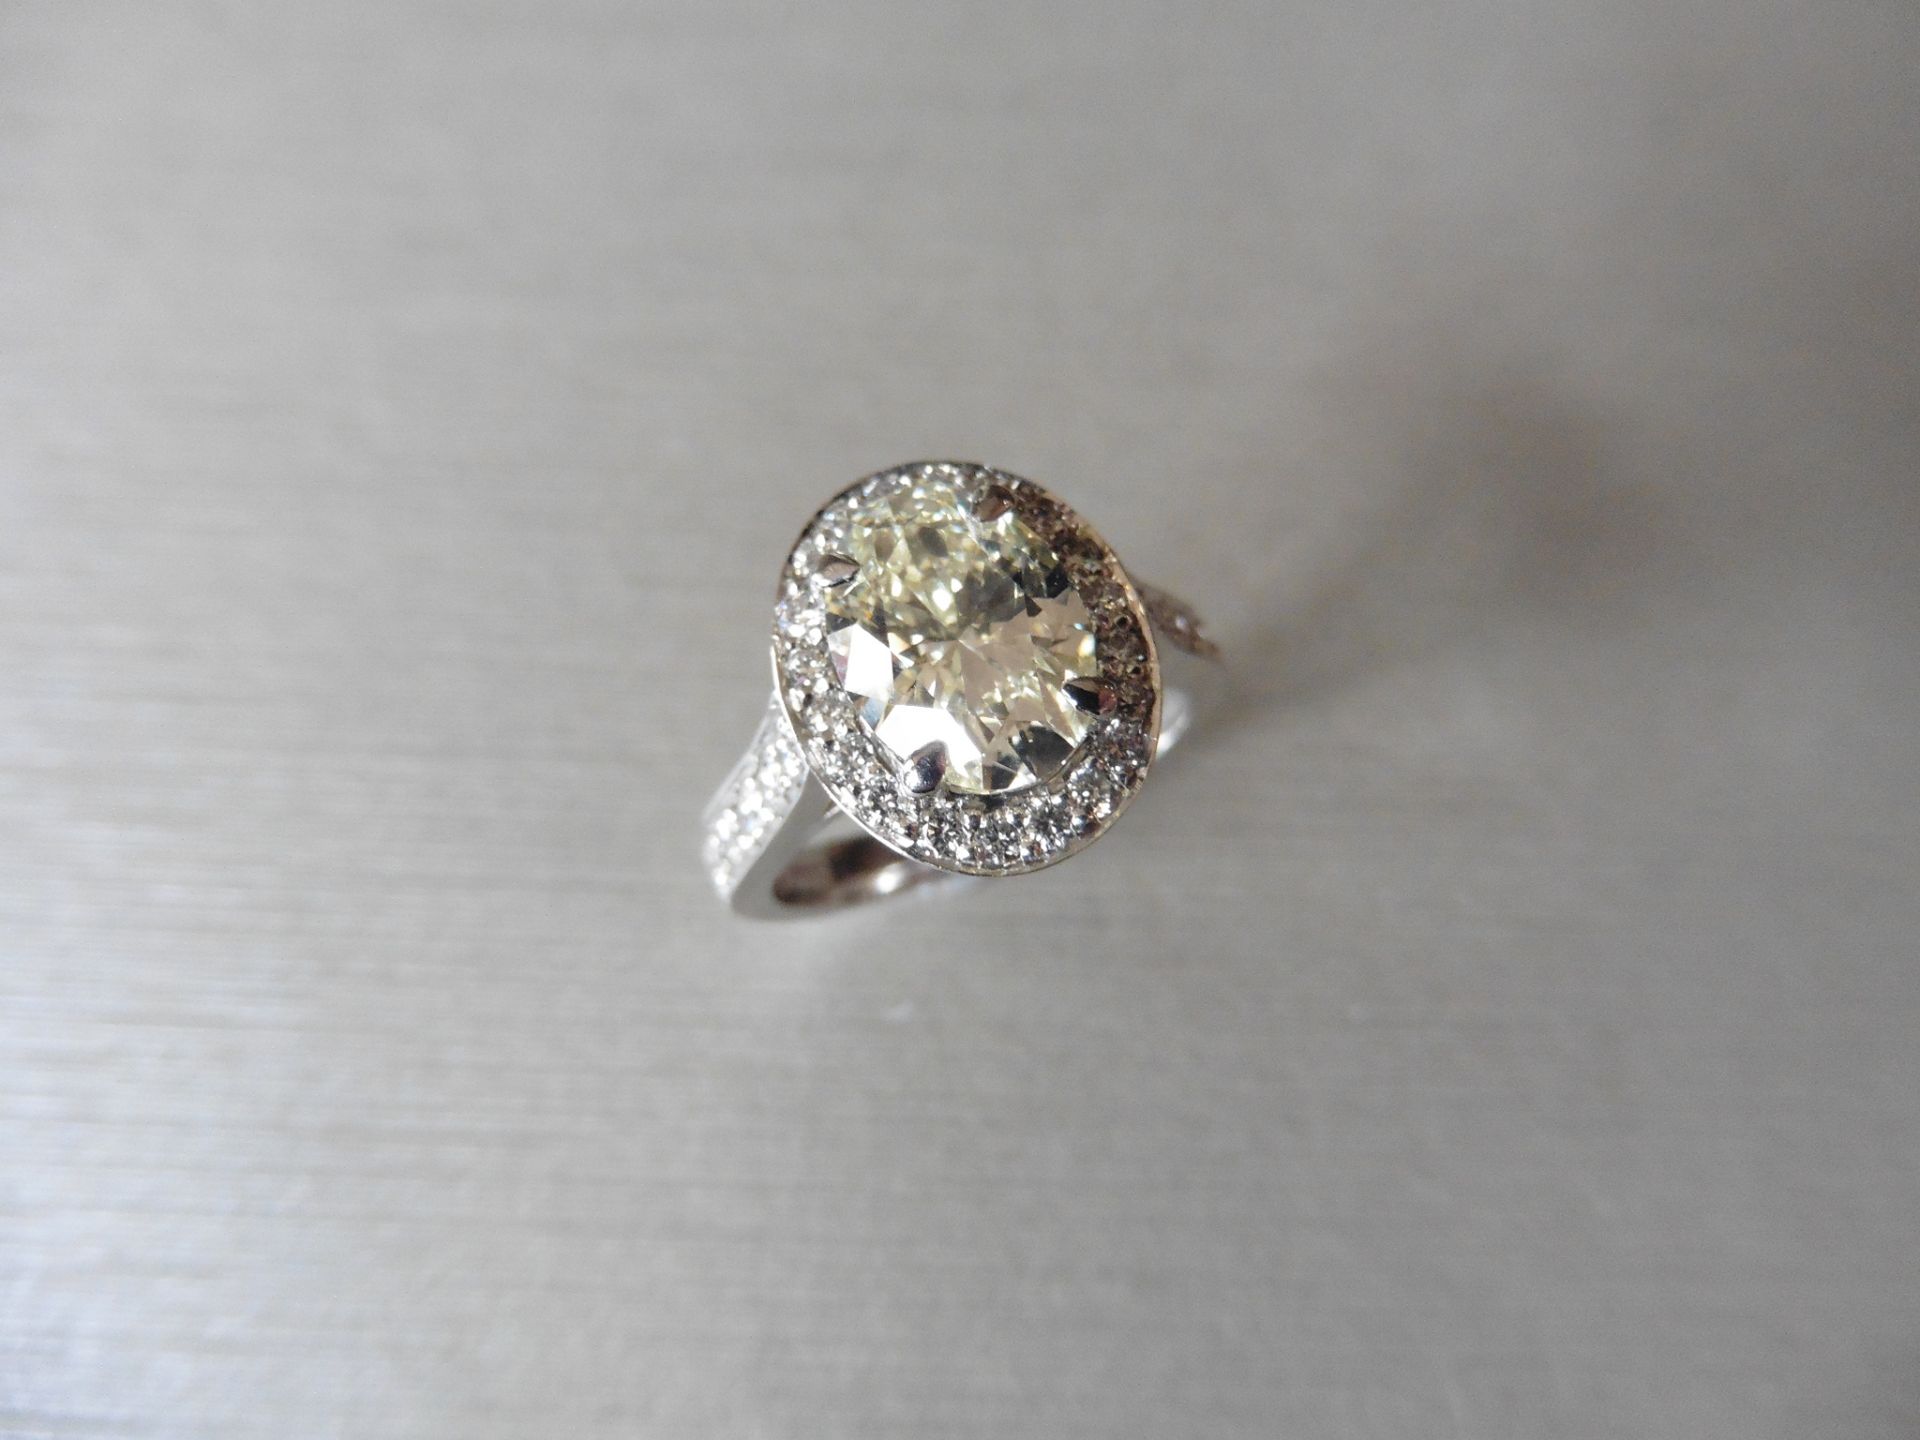 18ct white gold diamond set solitaire ring. 2.01ct oval cut natural yellow diamond in the centre VS2